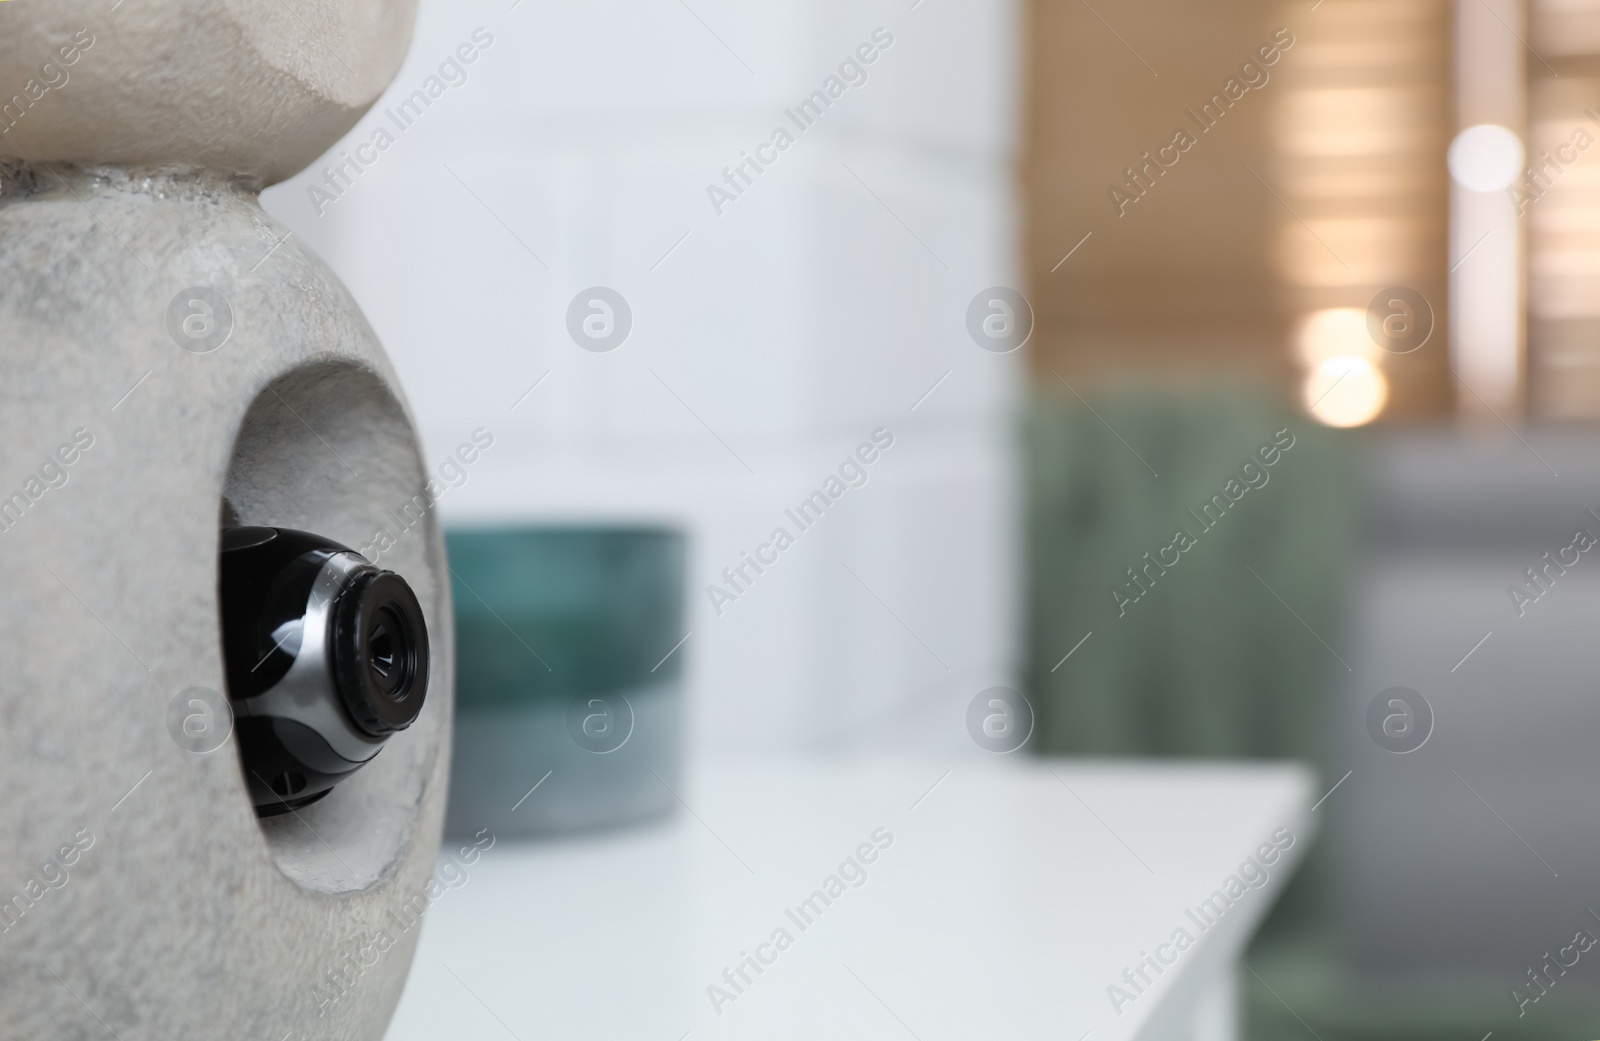 Photo of Statue with small hidden camera in room